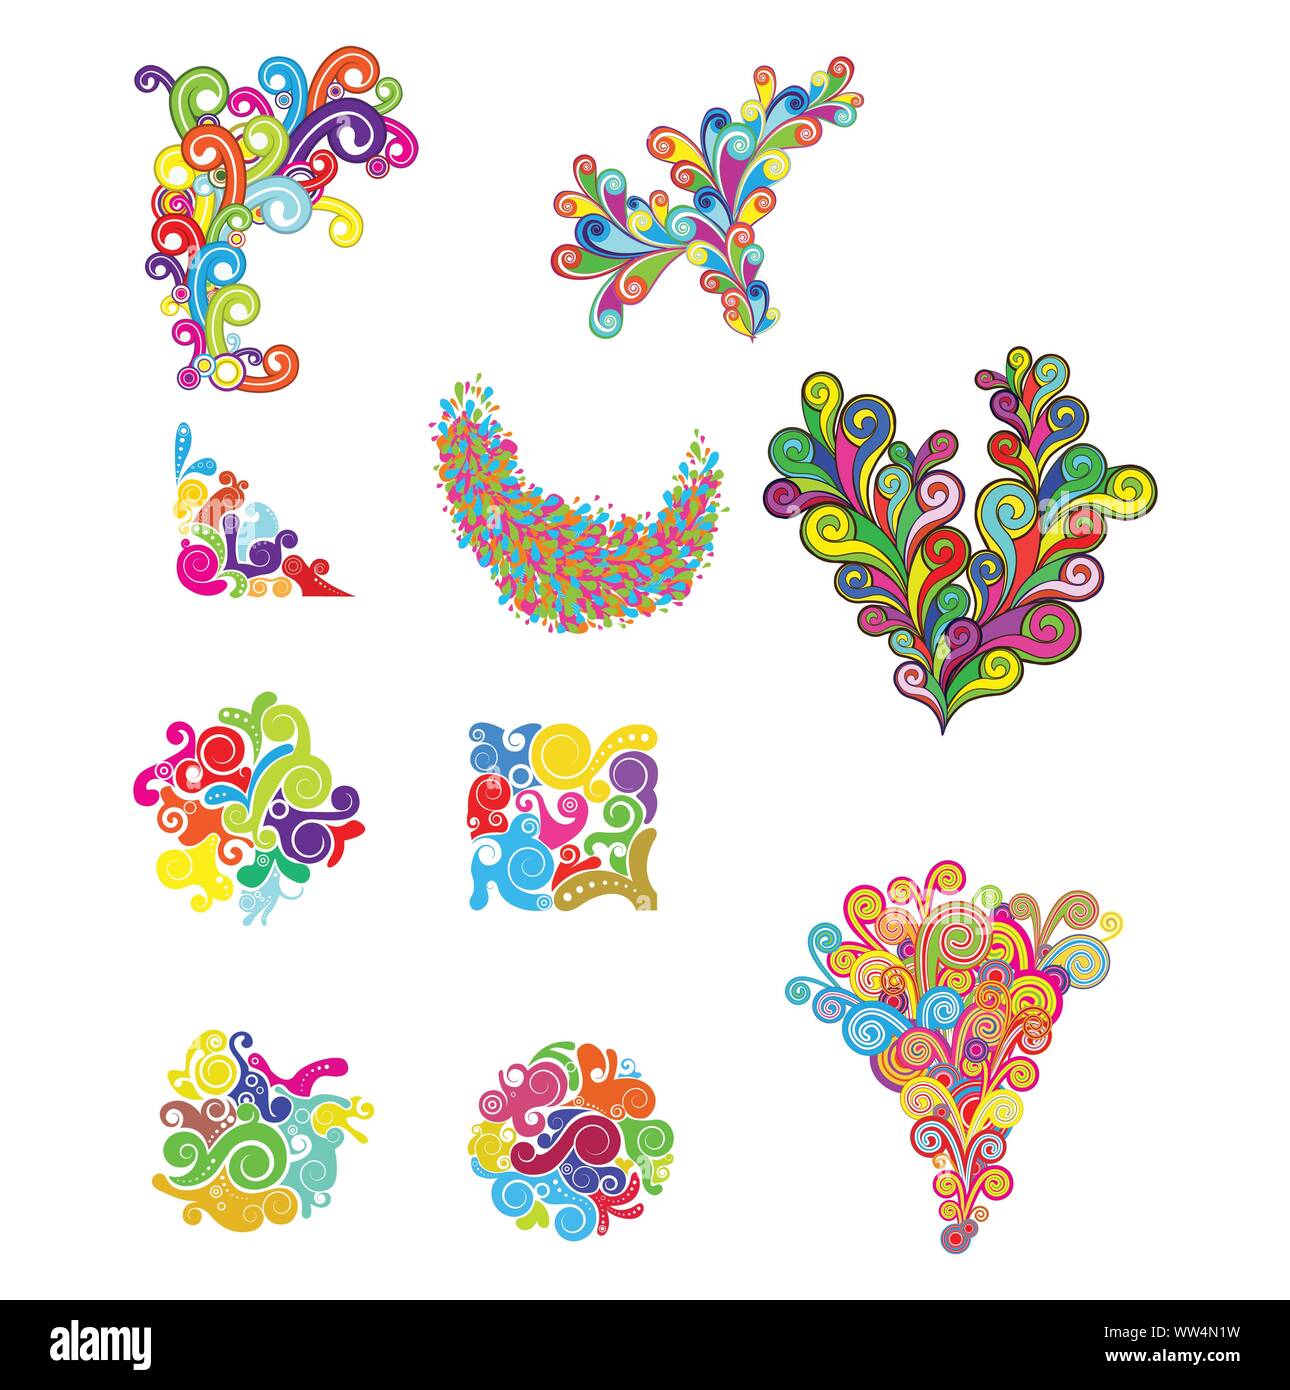 Design floral vector pack, Hand Drawn vintage floral elements. Swirls, laurels, frames, arrows, leaves, feathers, dividers, branches, banners and curl. Stock Vector